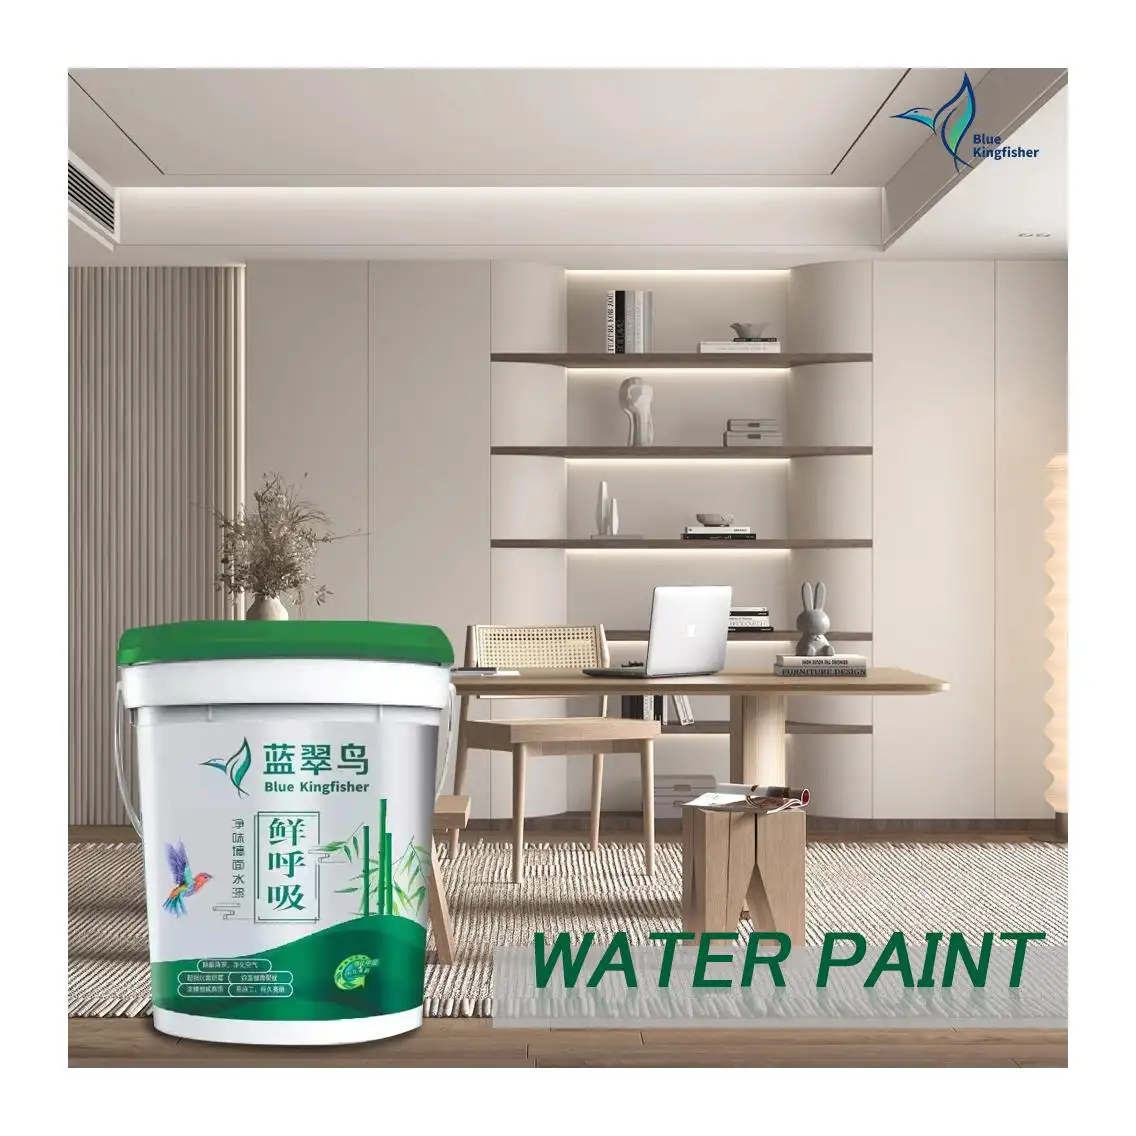 Color Powder Roof Waterproof Coating House Exterior Interior Latex Wall Paint Industrial Style Art Paint Wall Rust Patina Paint